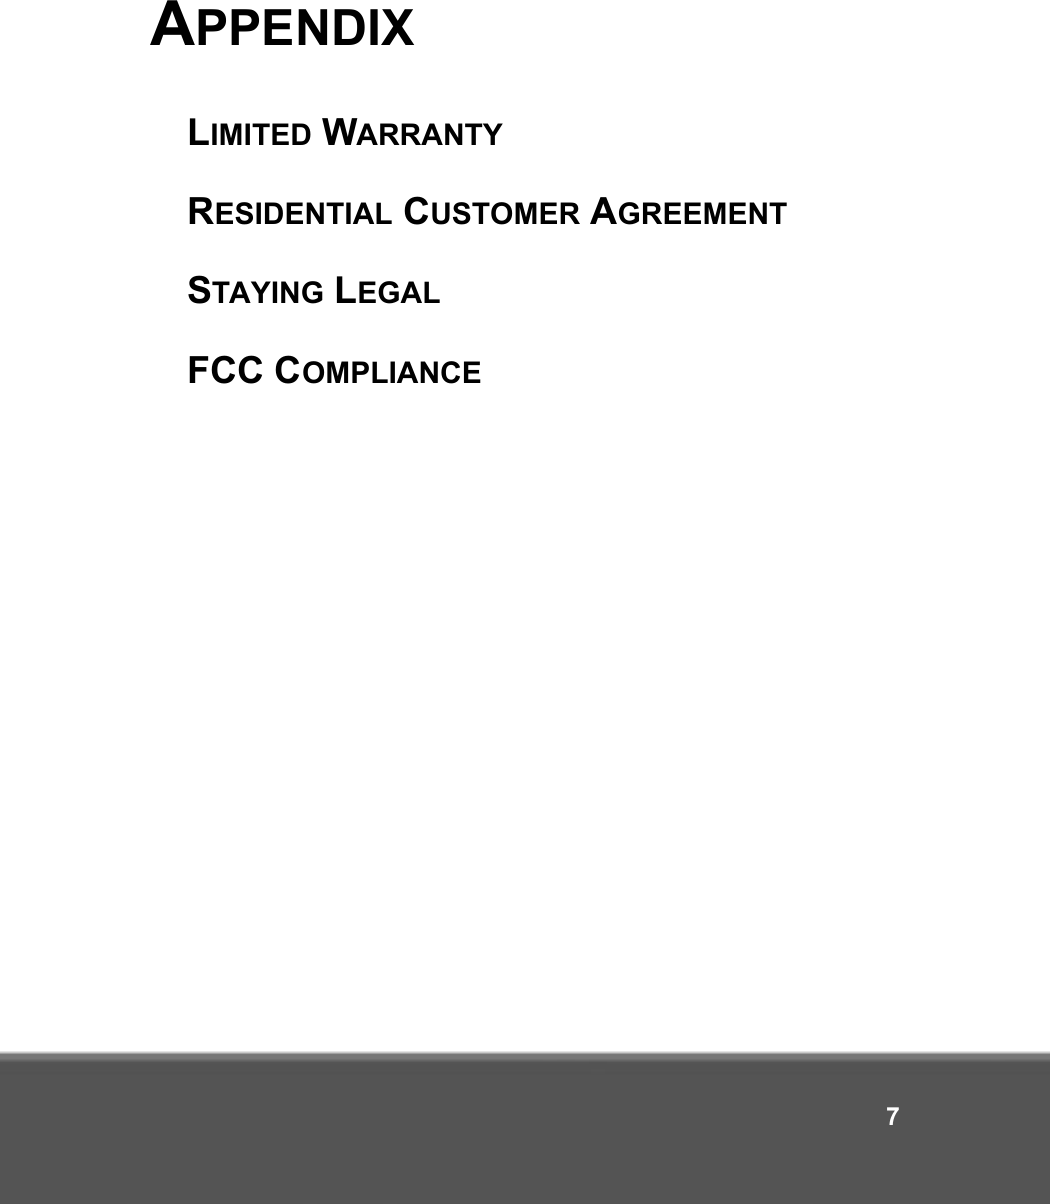 7APPENDIXLIMITED WARRANTYRESIDENTIAL CUSTOMER AGREEMENTSTAYING LEGALFCC COMPLIANCE